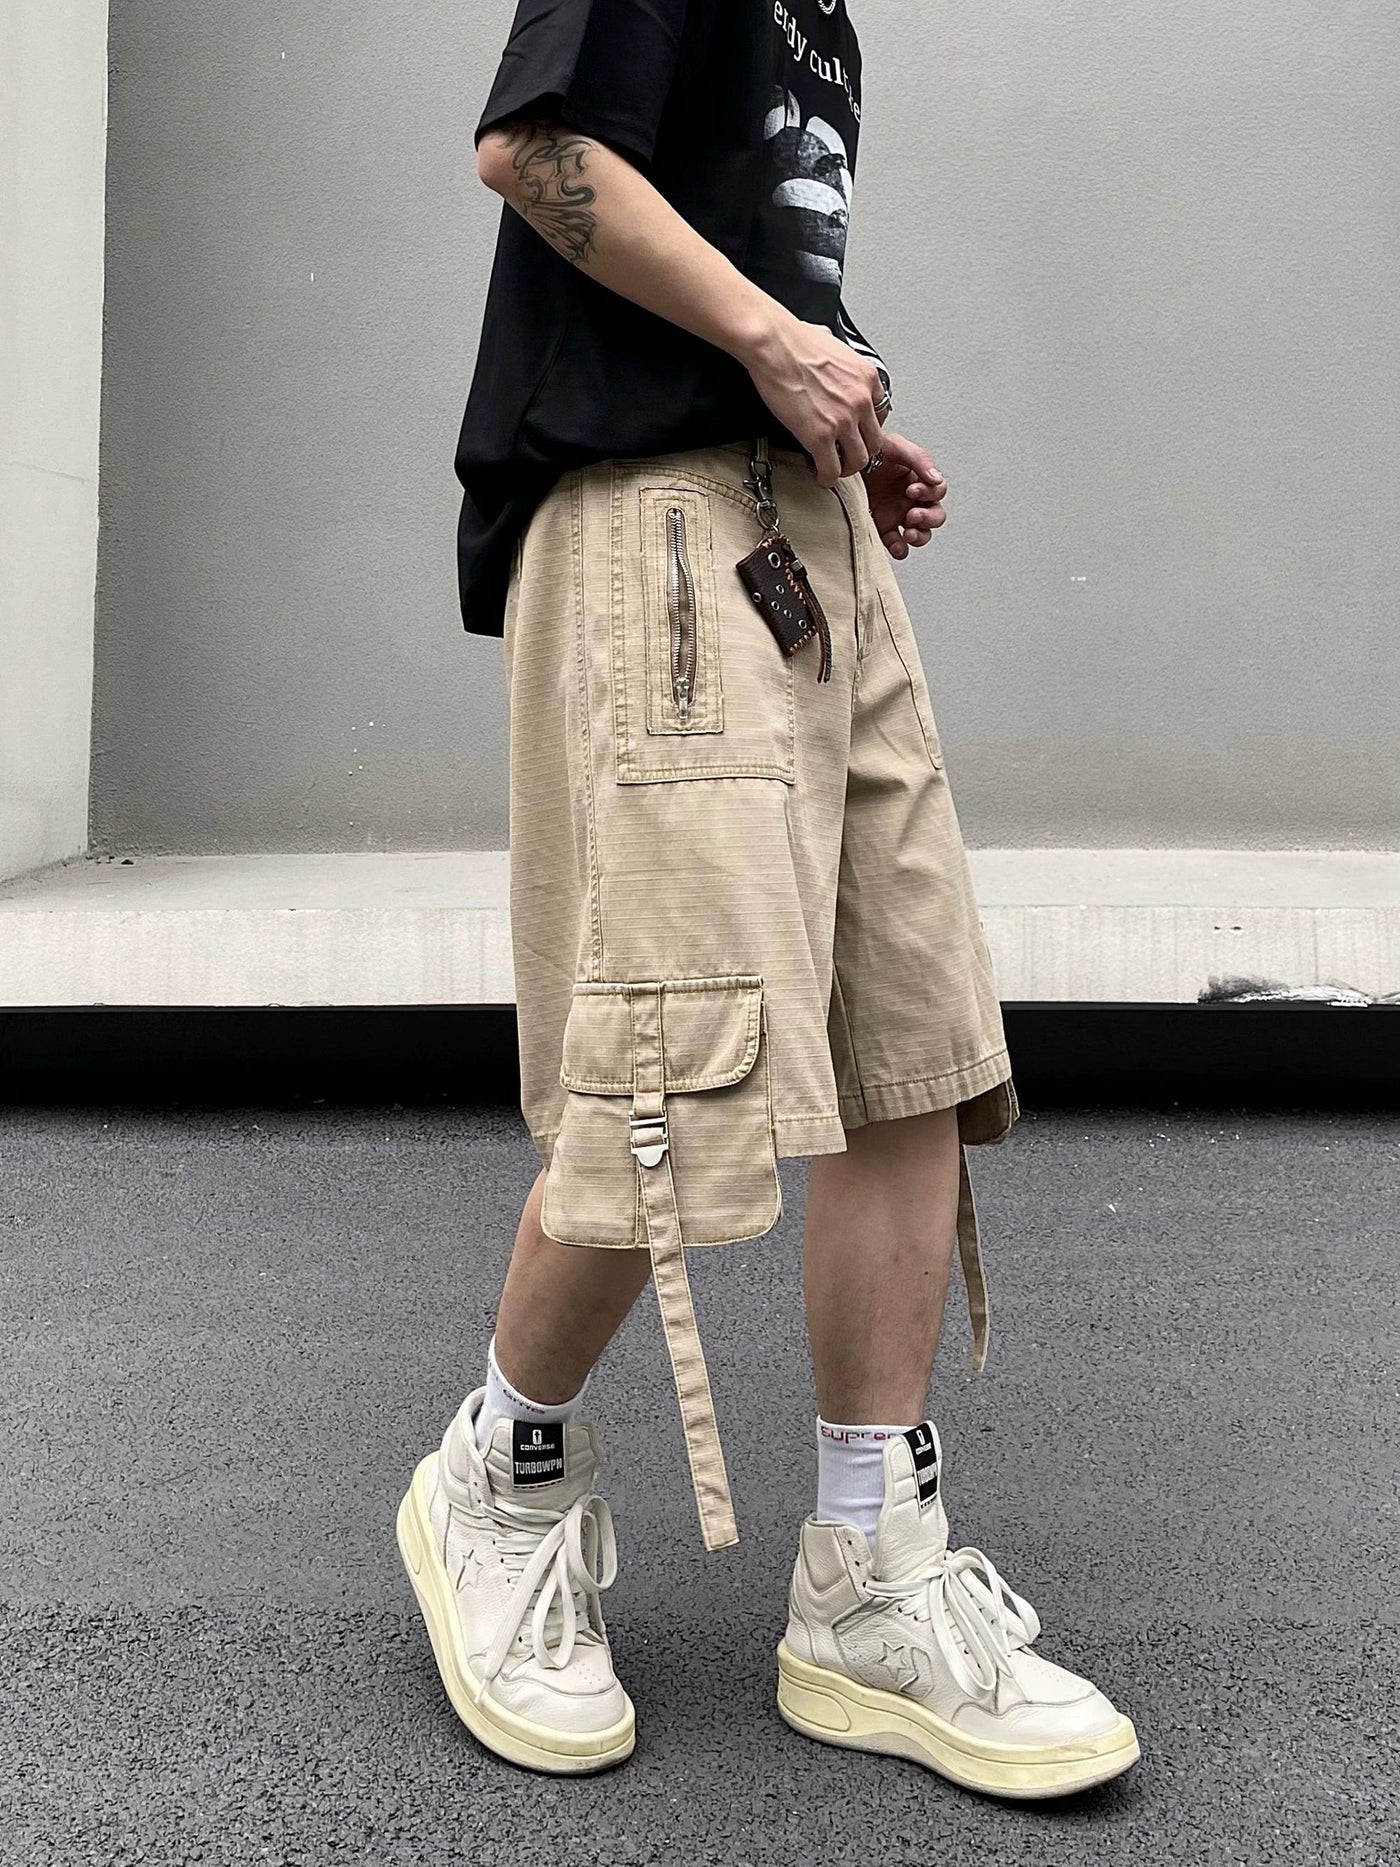 Buckled Strap Detail Cargo Shorts Korean Street Fashion Shorts By Blacklists Shop Online at OH Vault